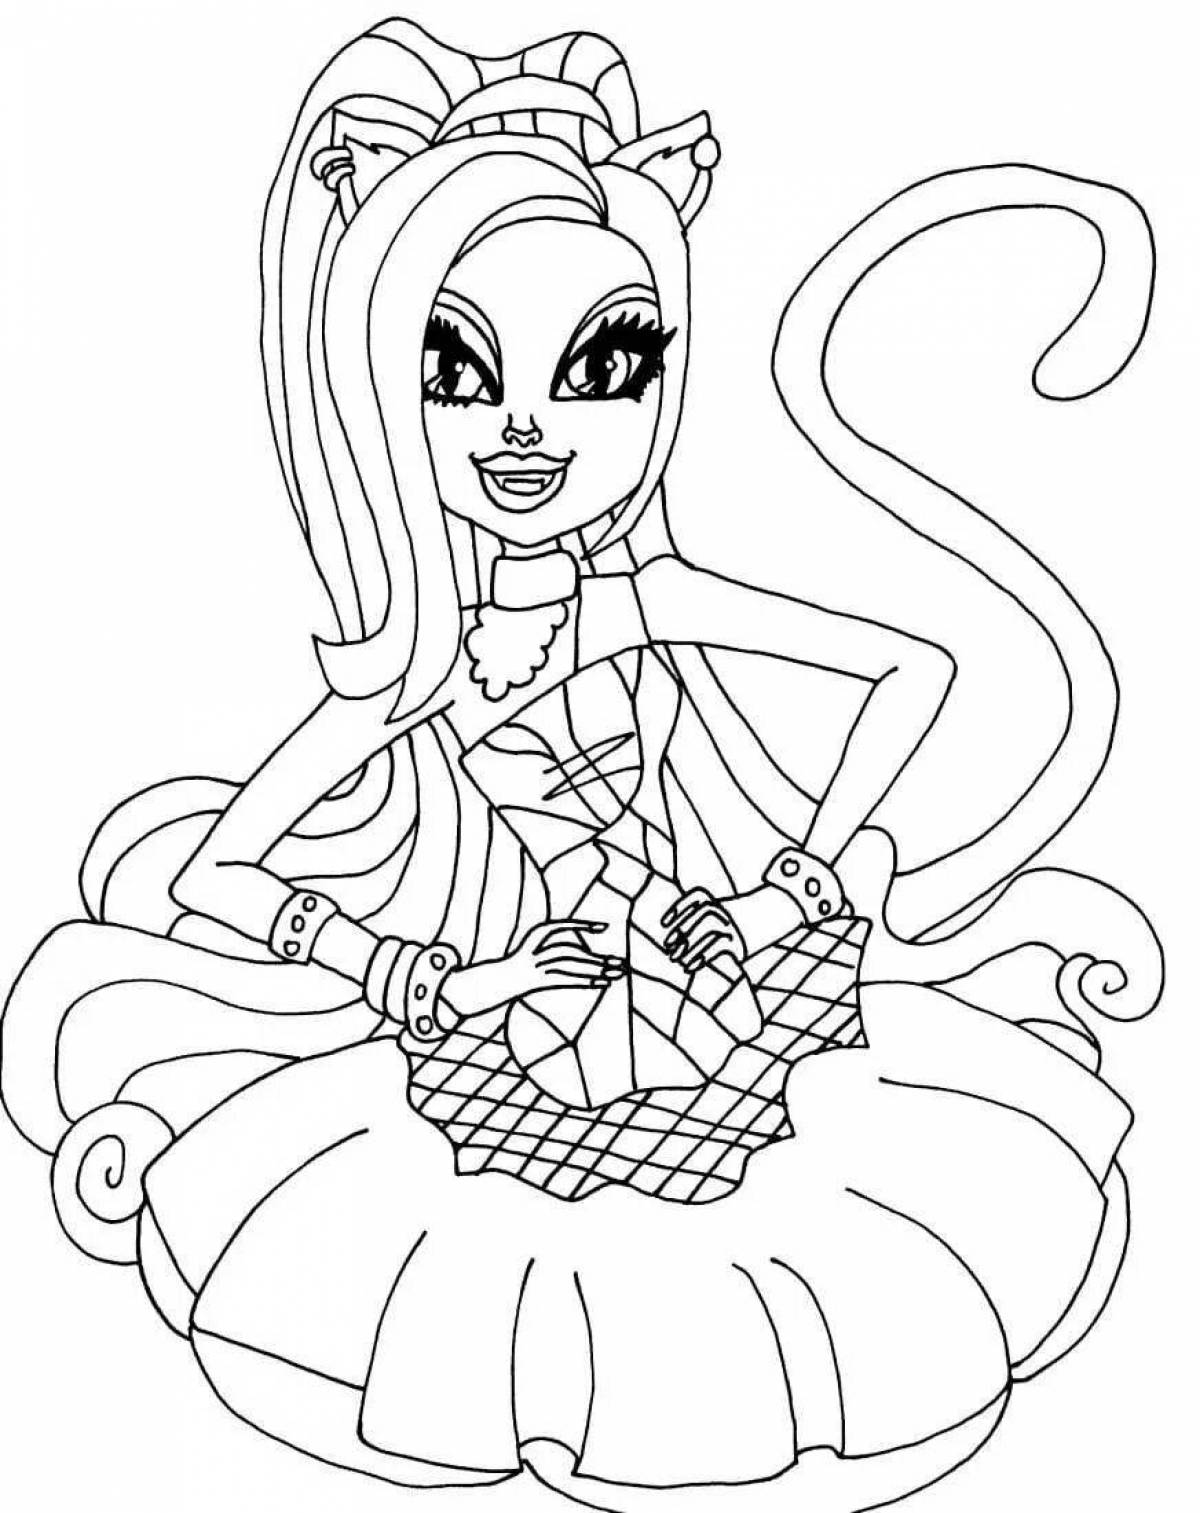 Monster high mystical coloring book for girls